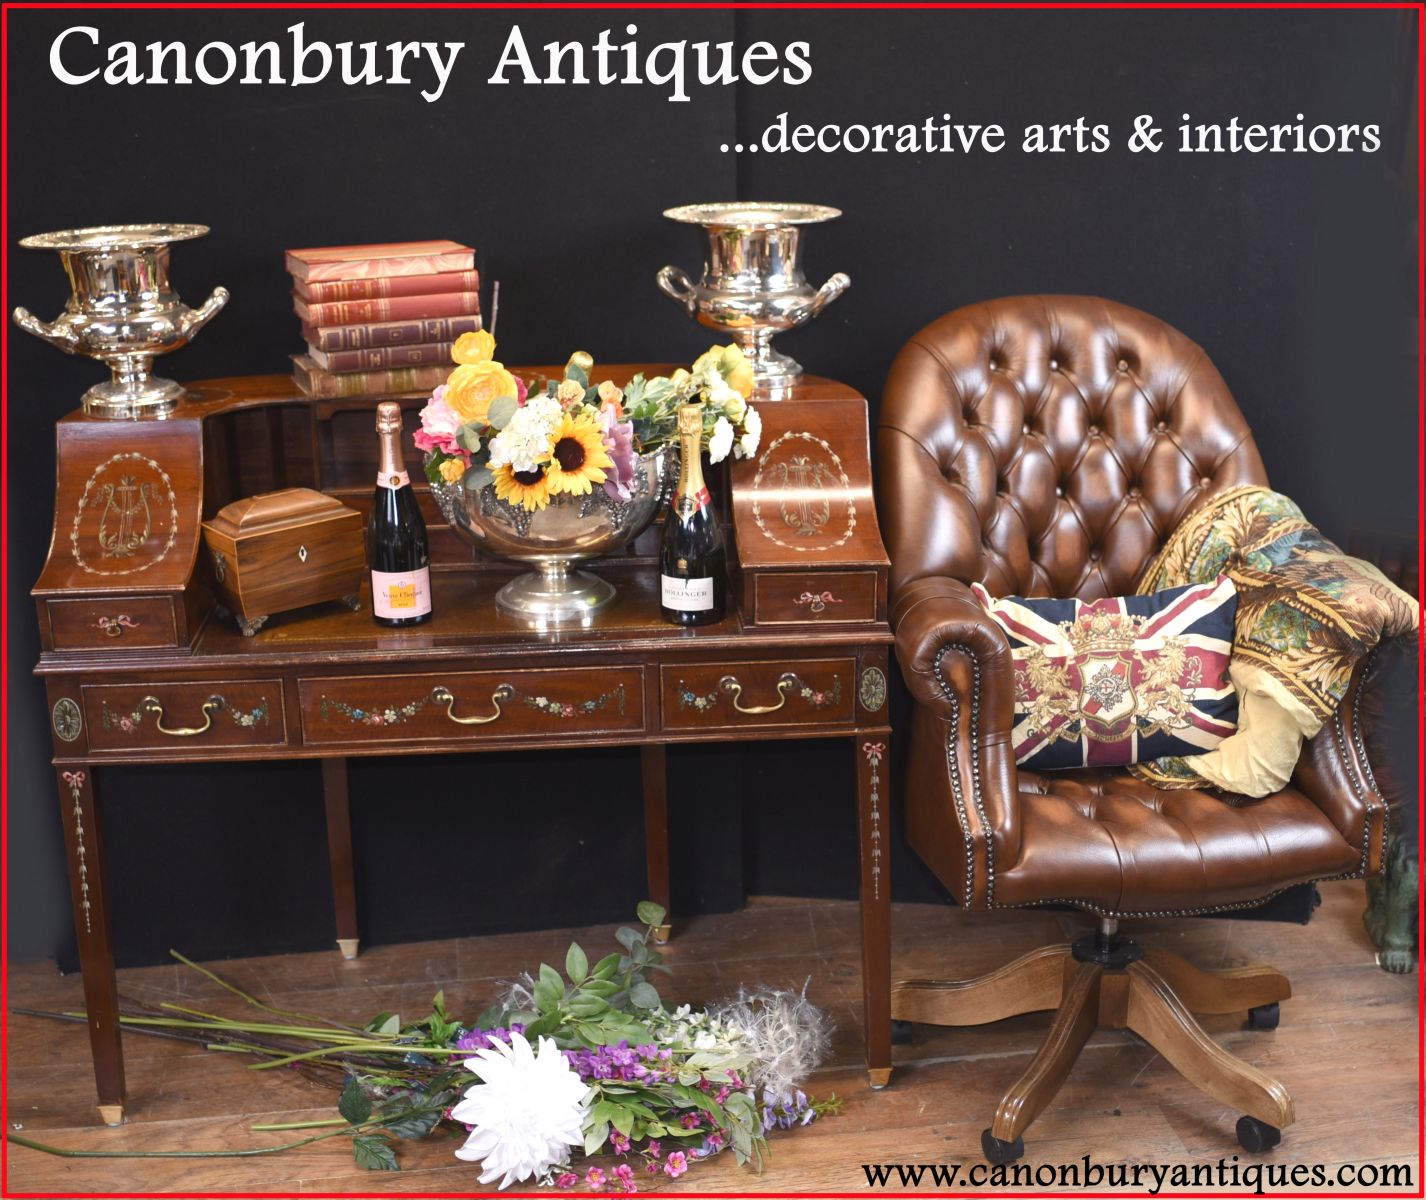 Nice things at Canonbury Antiques